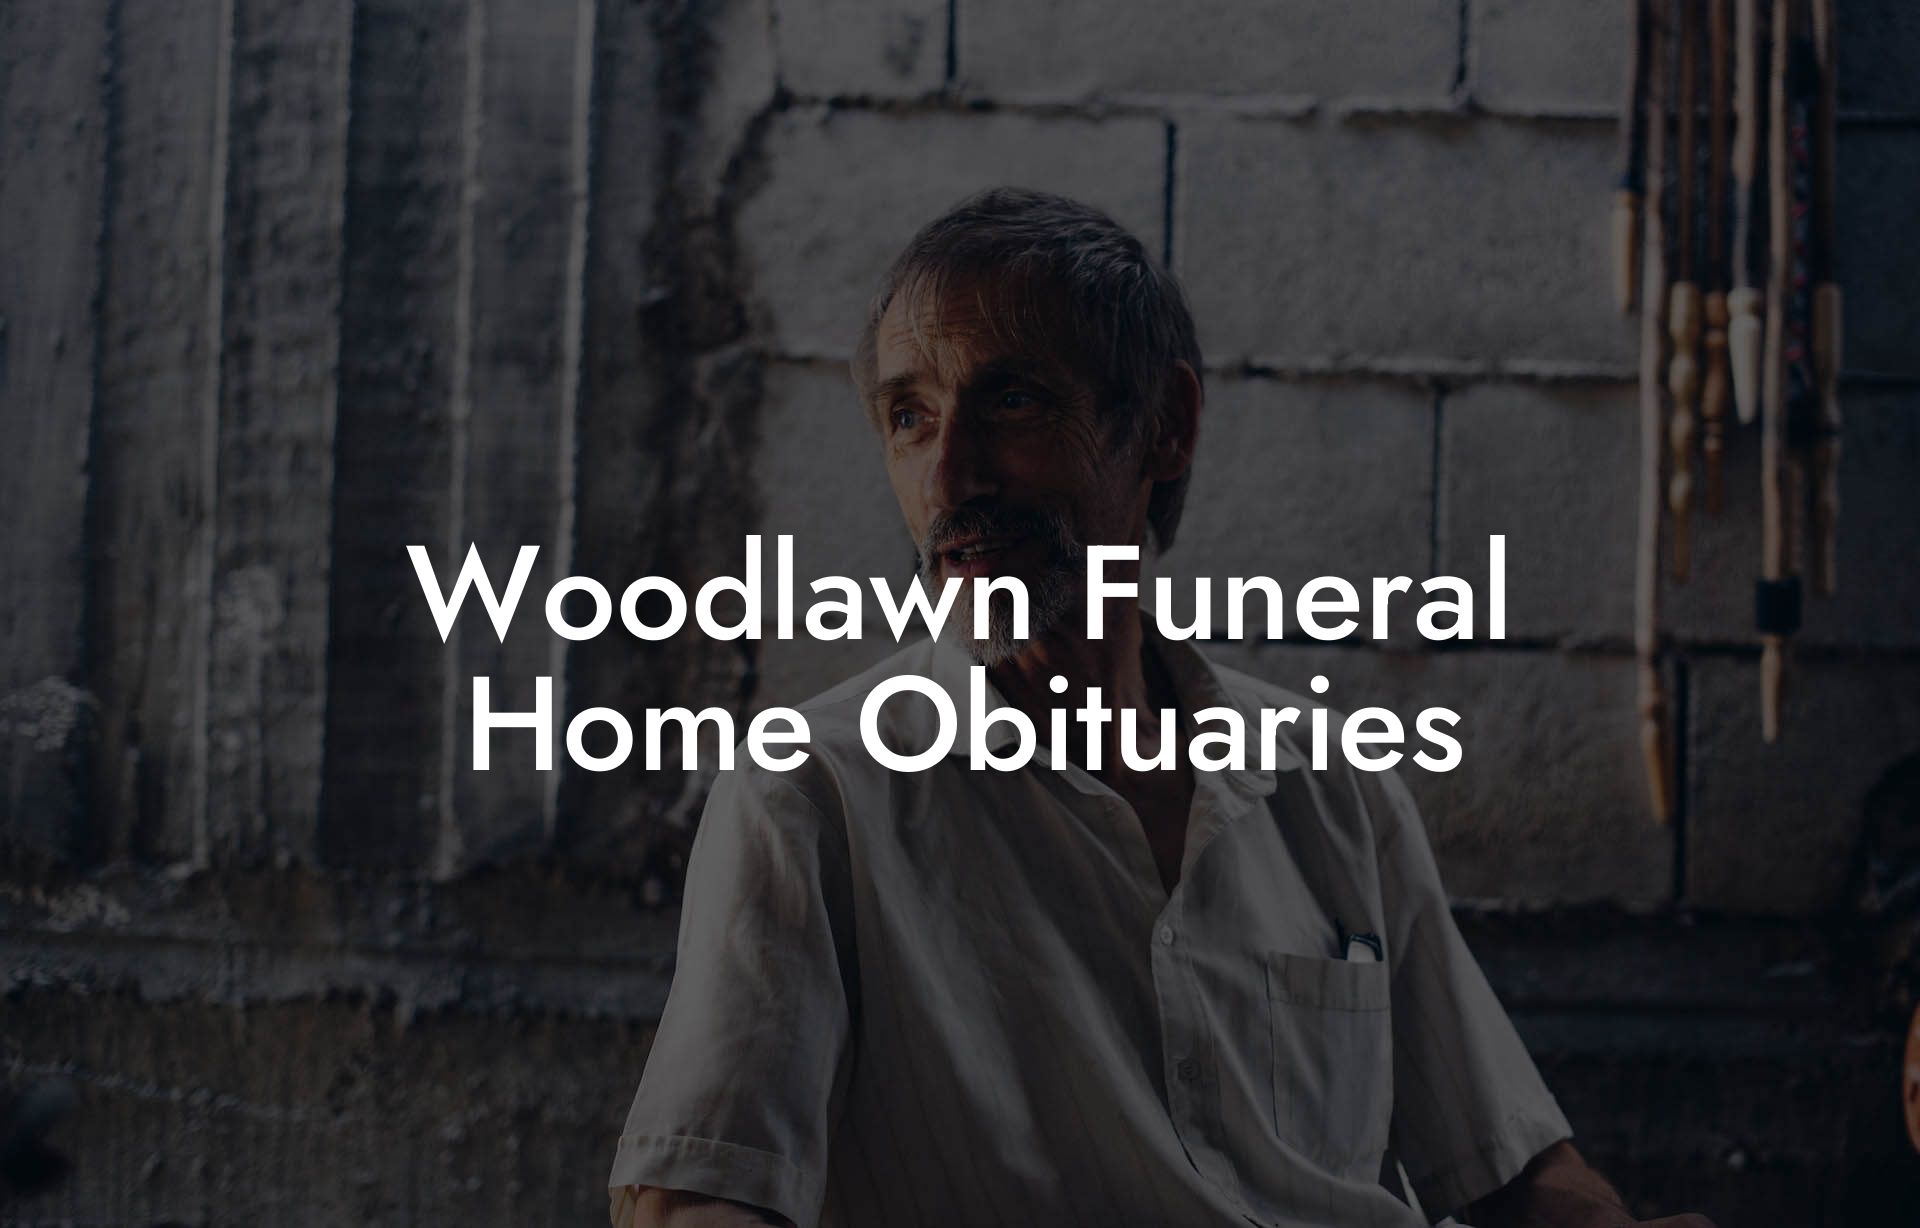 Woodlawn Funeral Home Obituaries